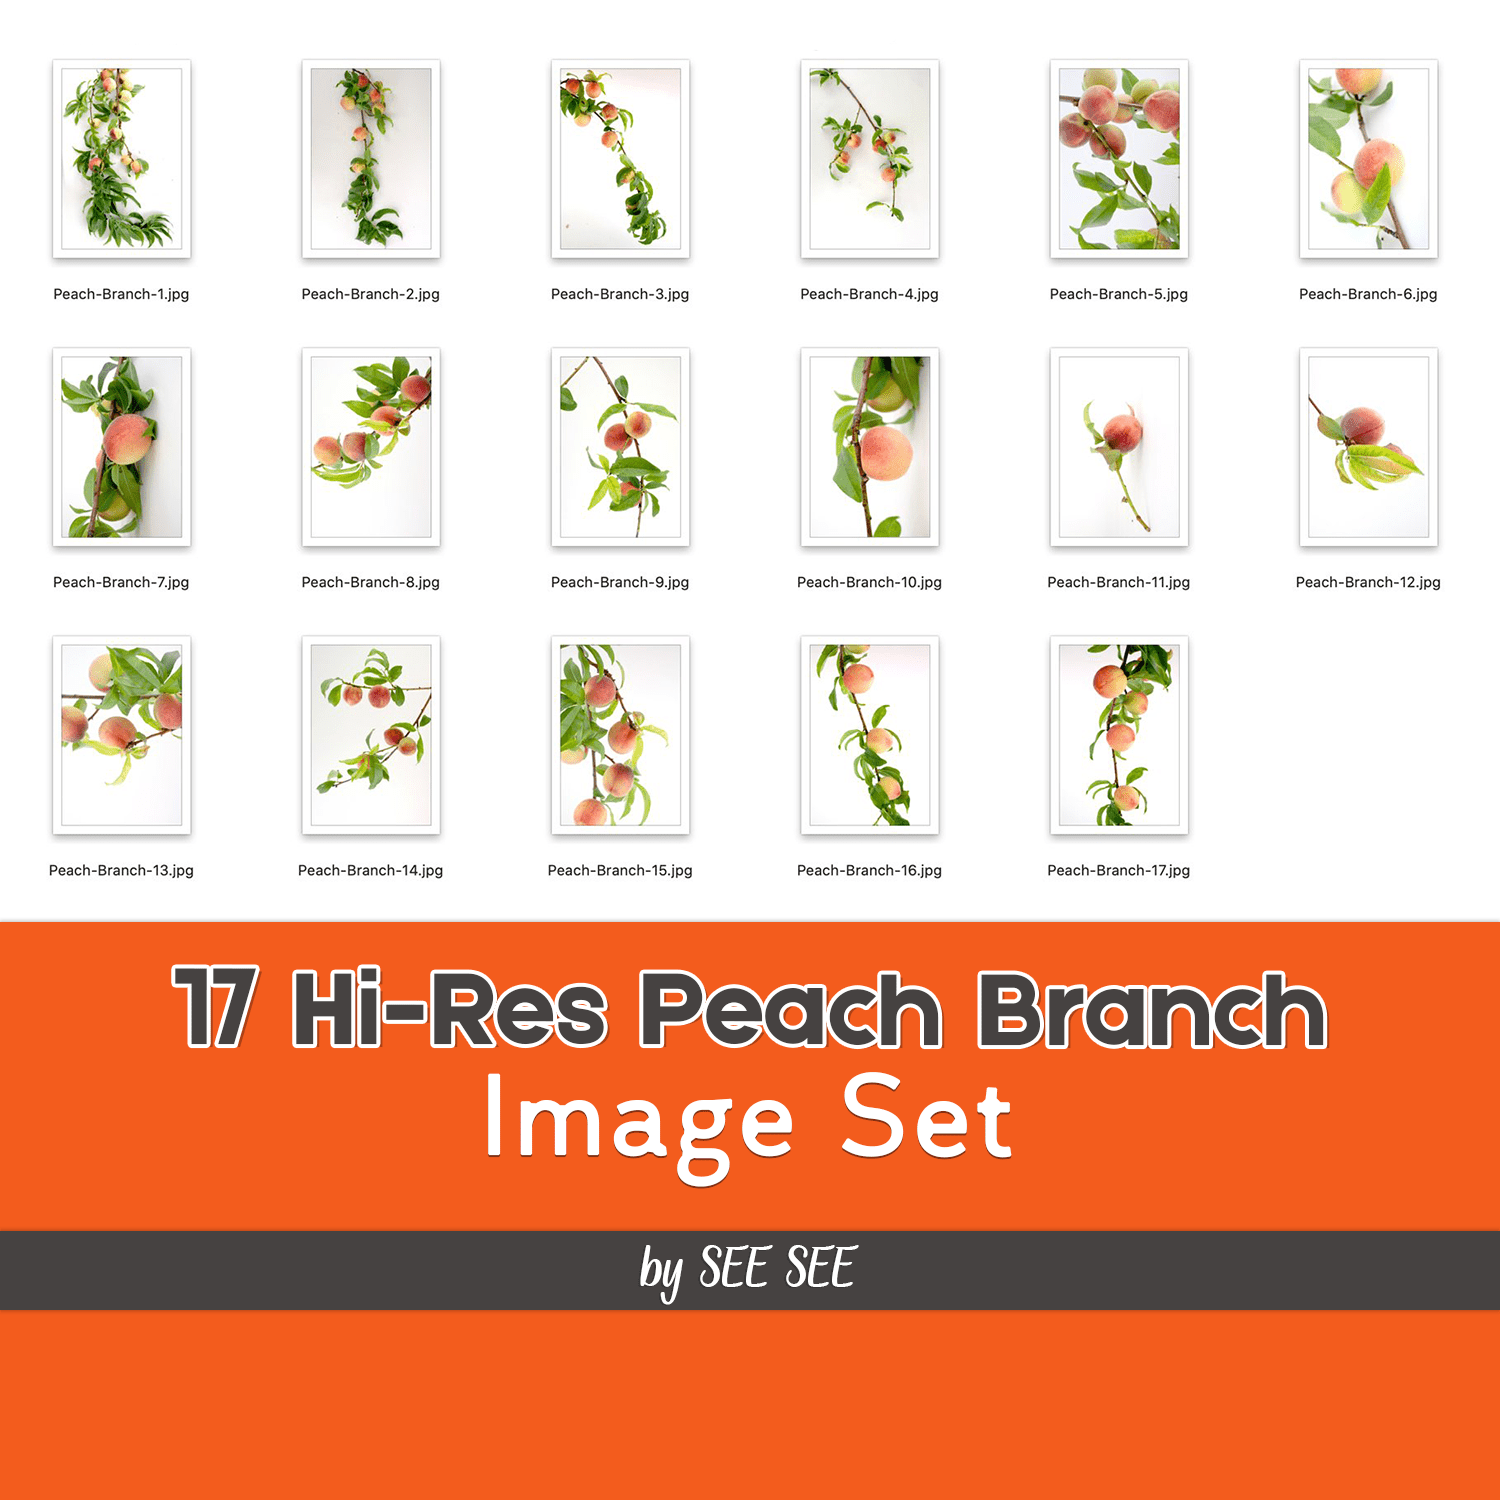 17 Hi-Res Peach Branch Image Set by SEE SEE